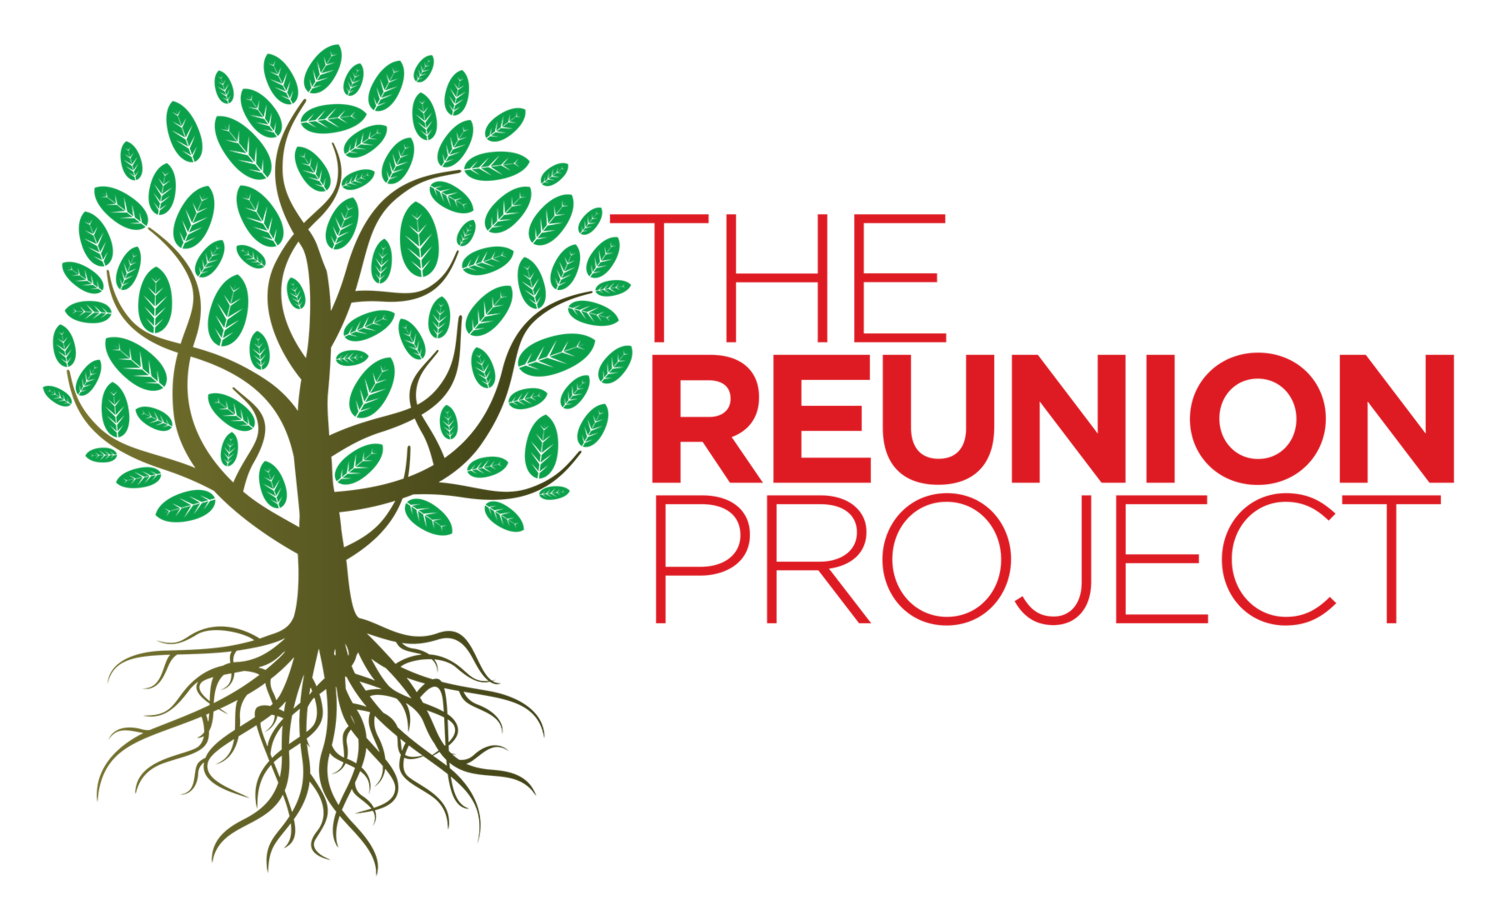 The Reunion Project